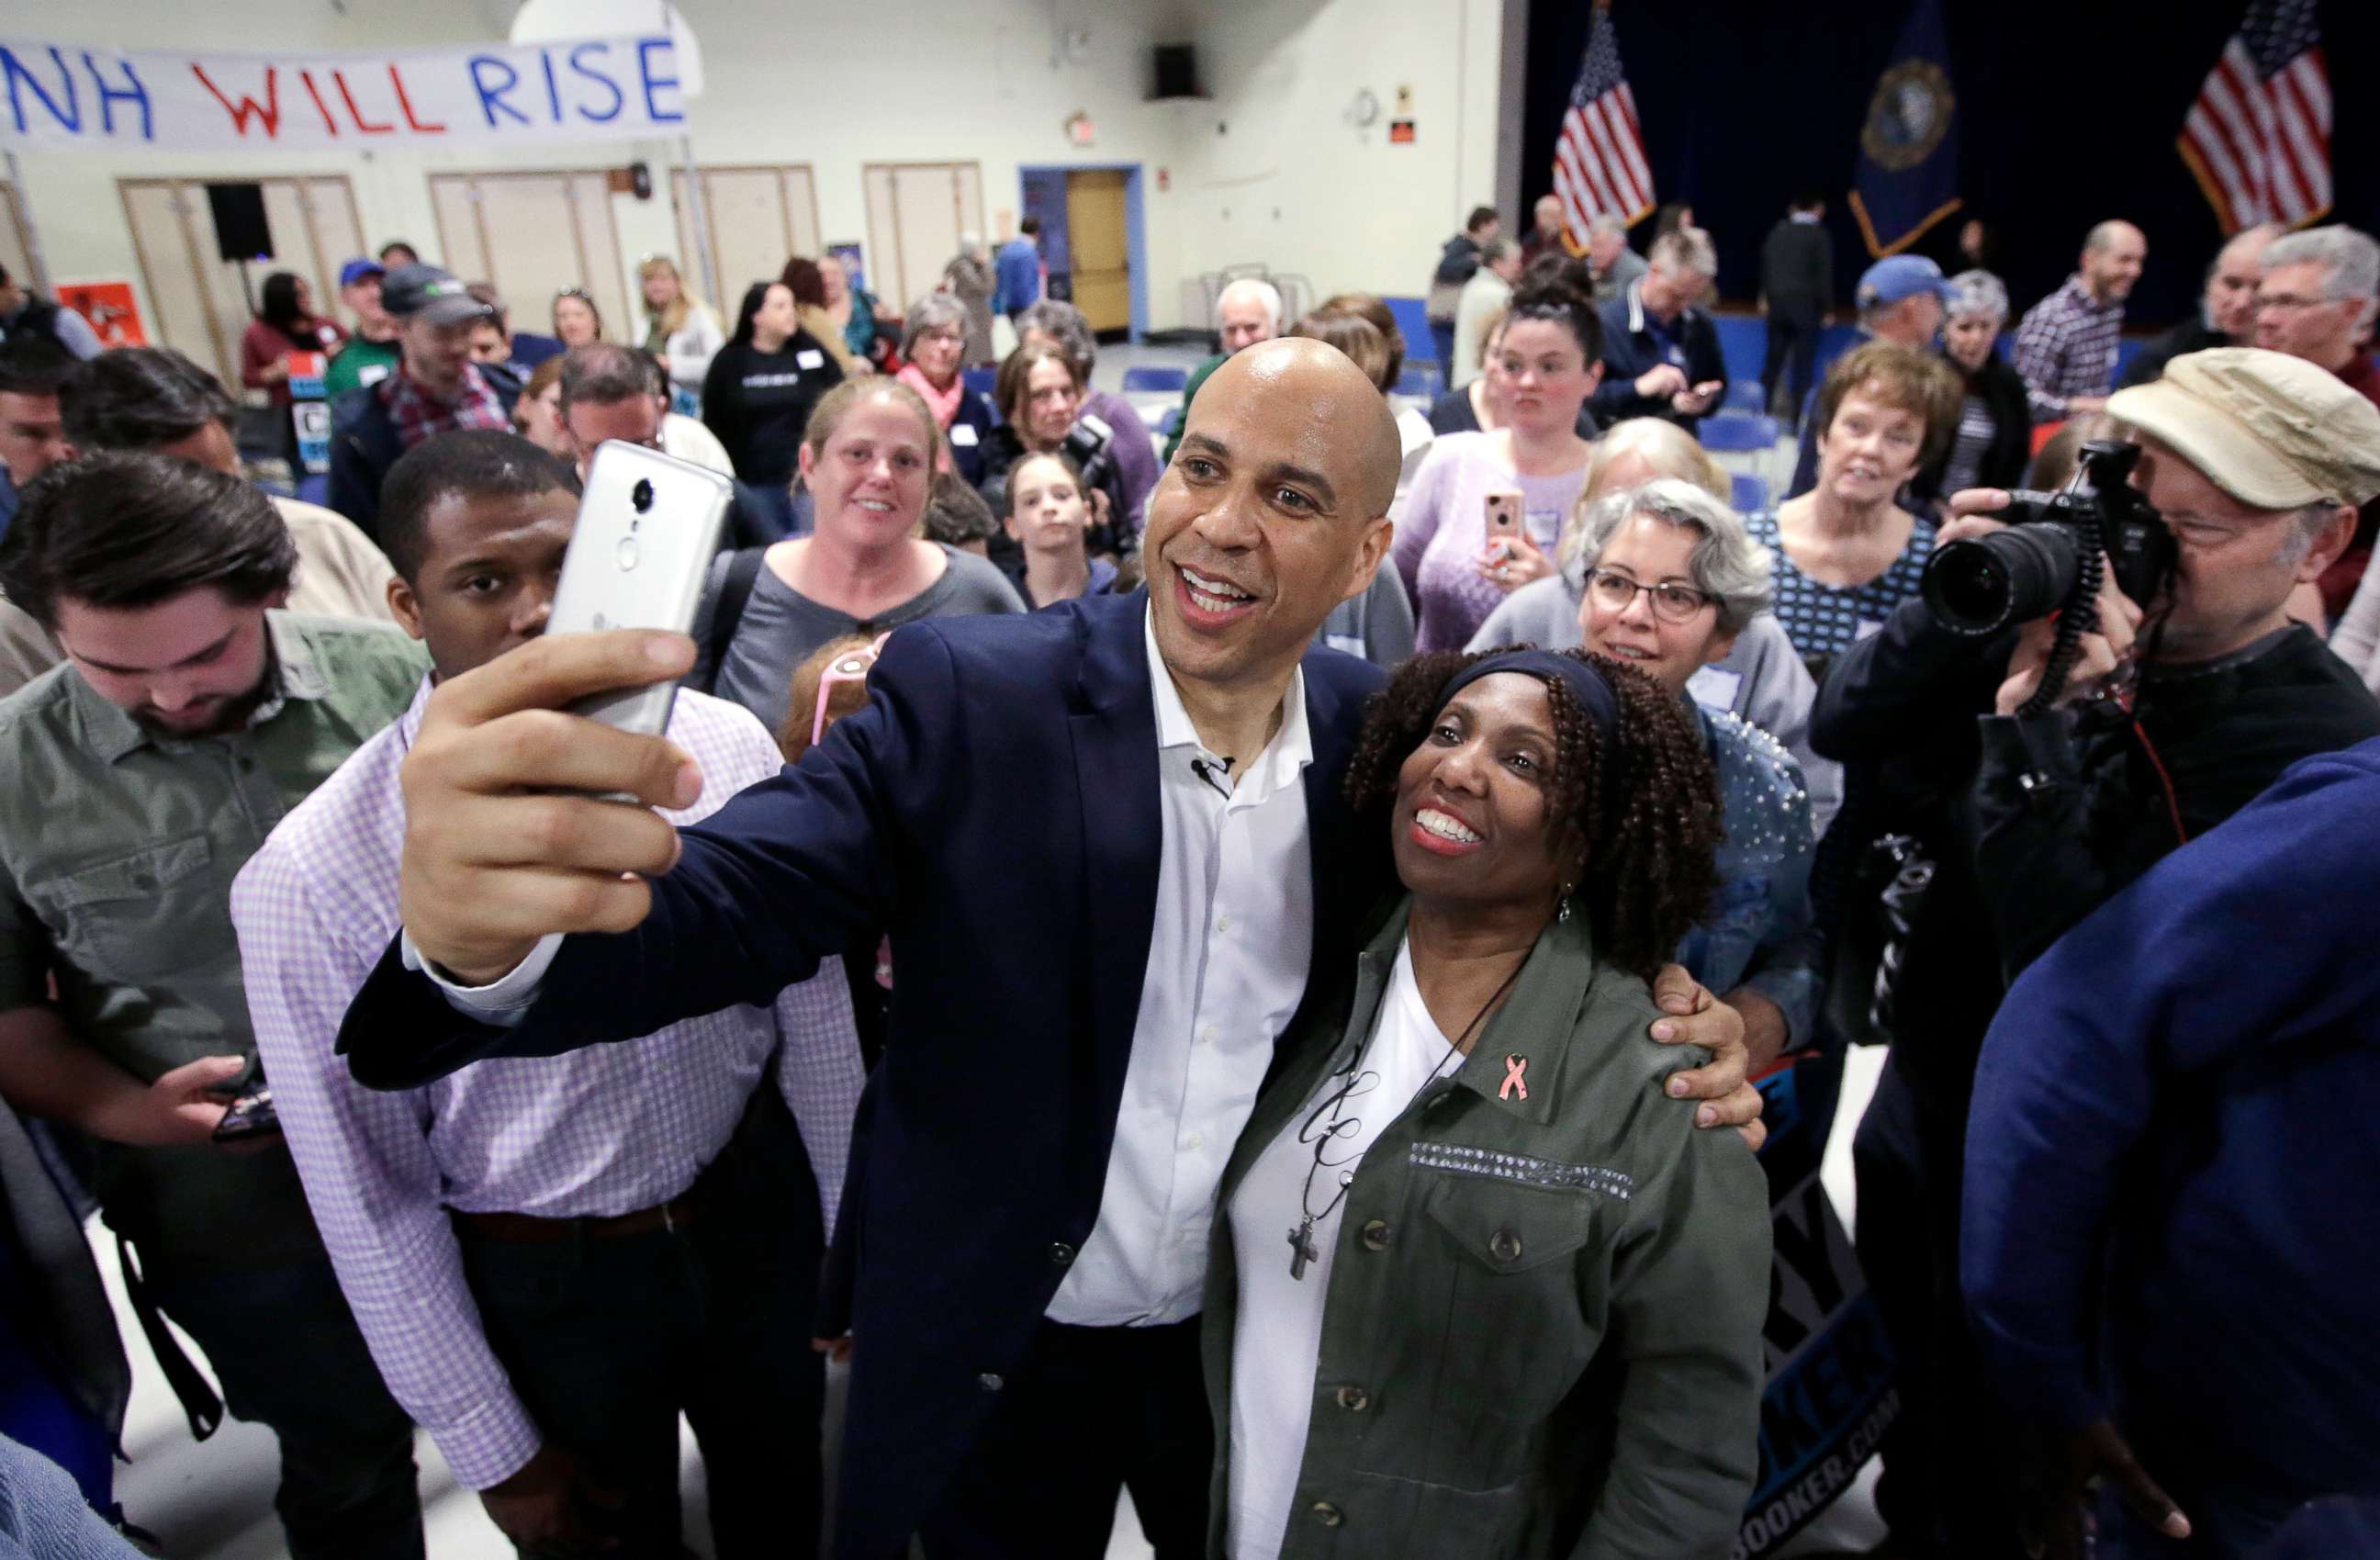 PHOTO: Sen. Cory Booker takes selfies with residents at the conclusion of a 2020 presidential campaign stop, April 7, 2019, in Londonderry, N.H.